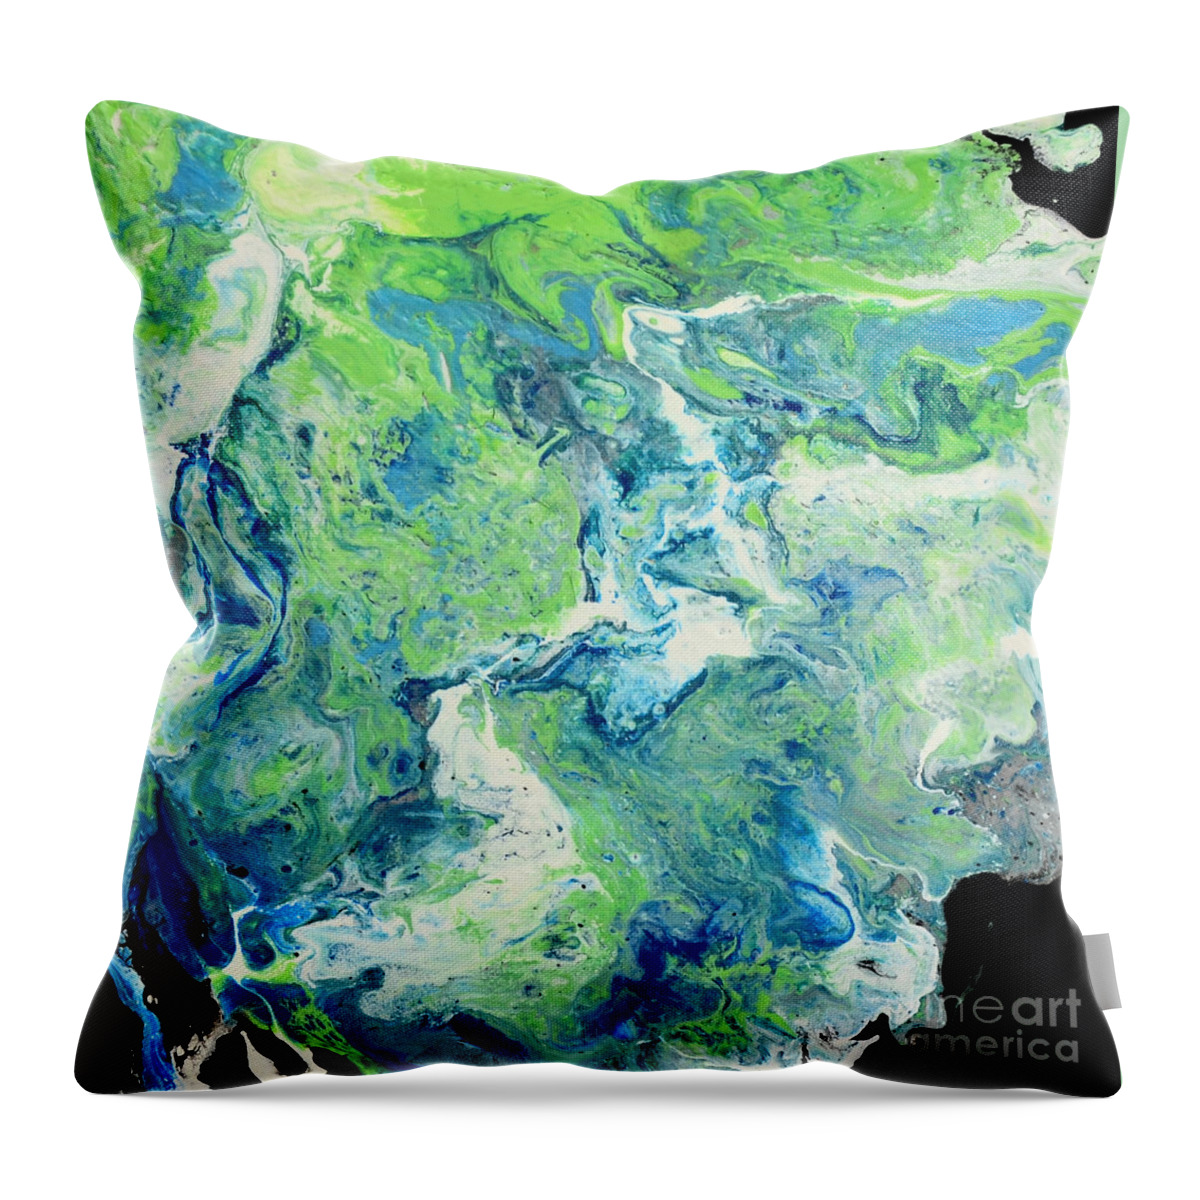 Green Throw Pillow featuring the painting Blue and Green Vibrations by Shelly Tschupp